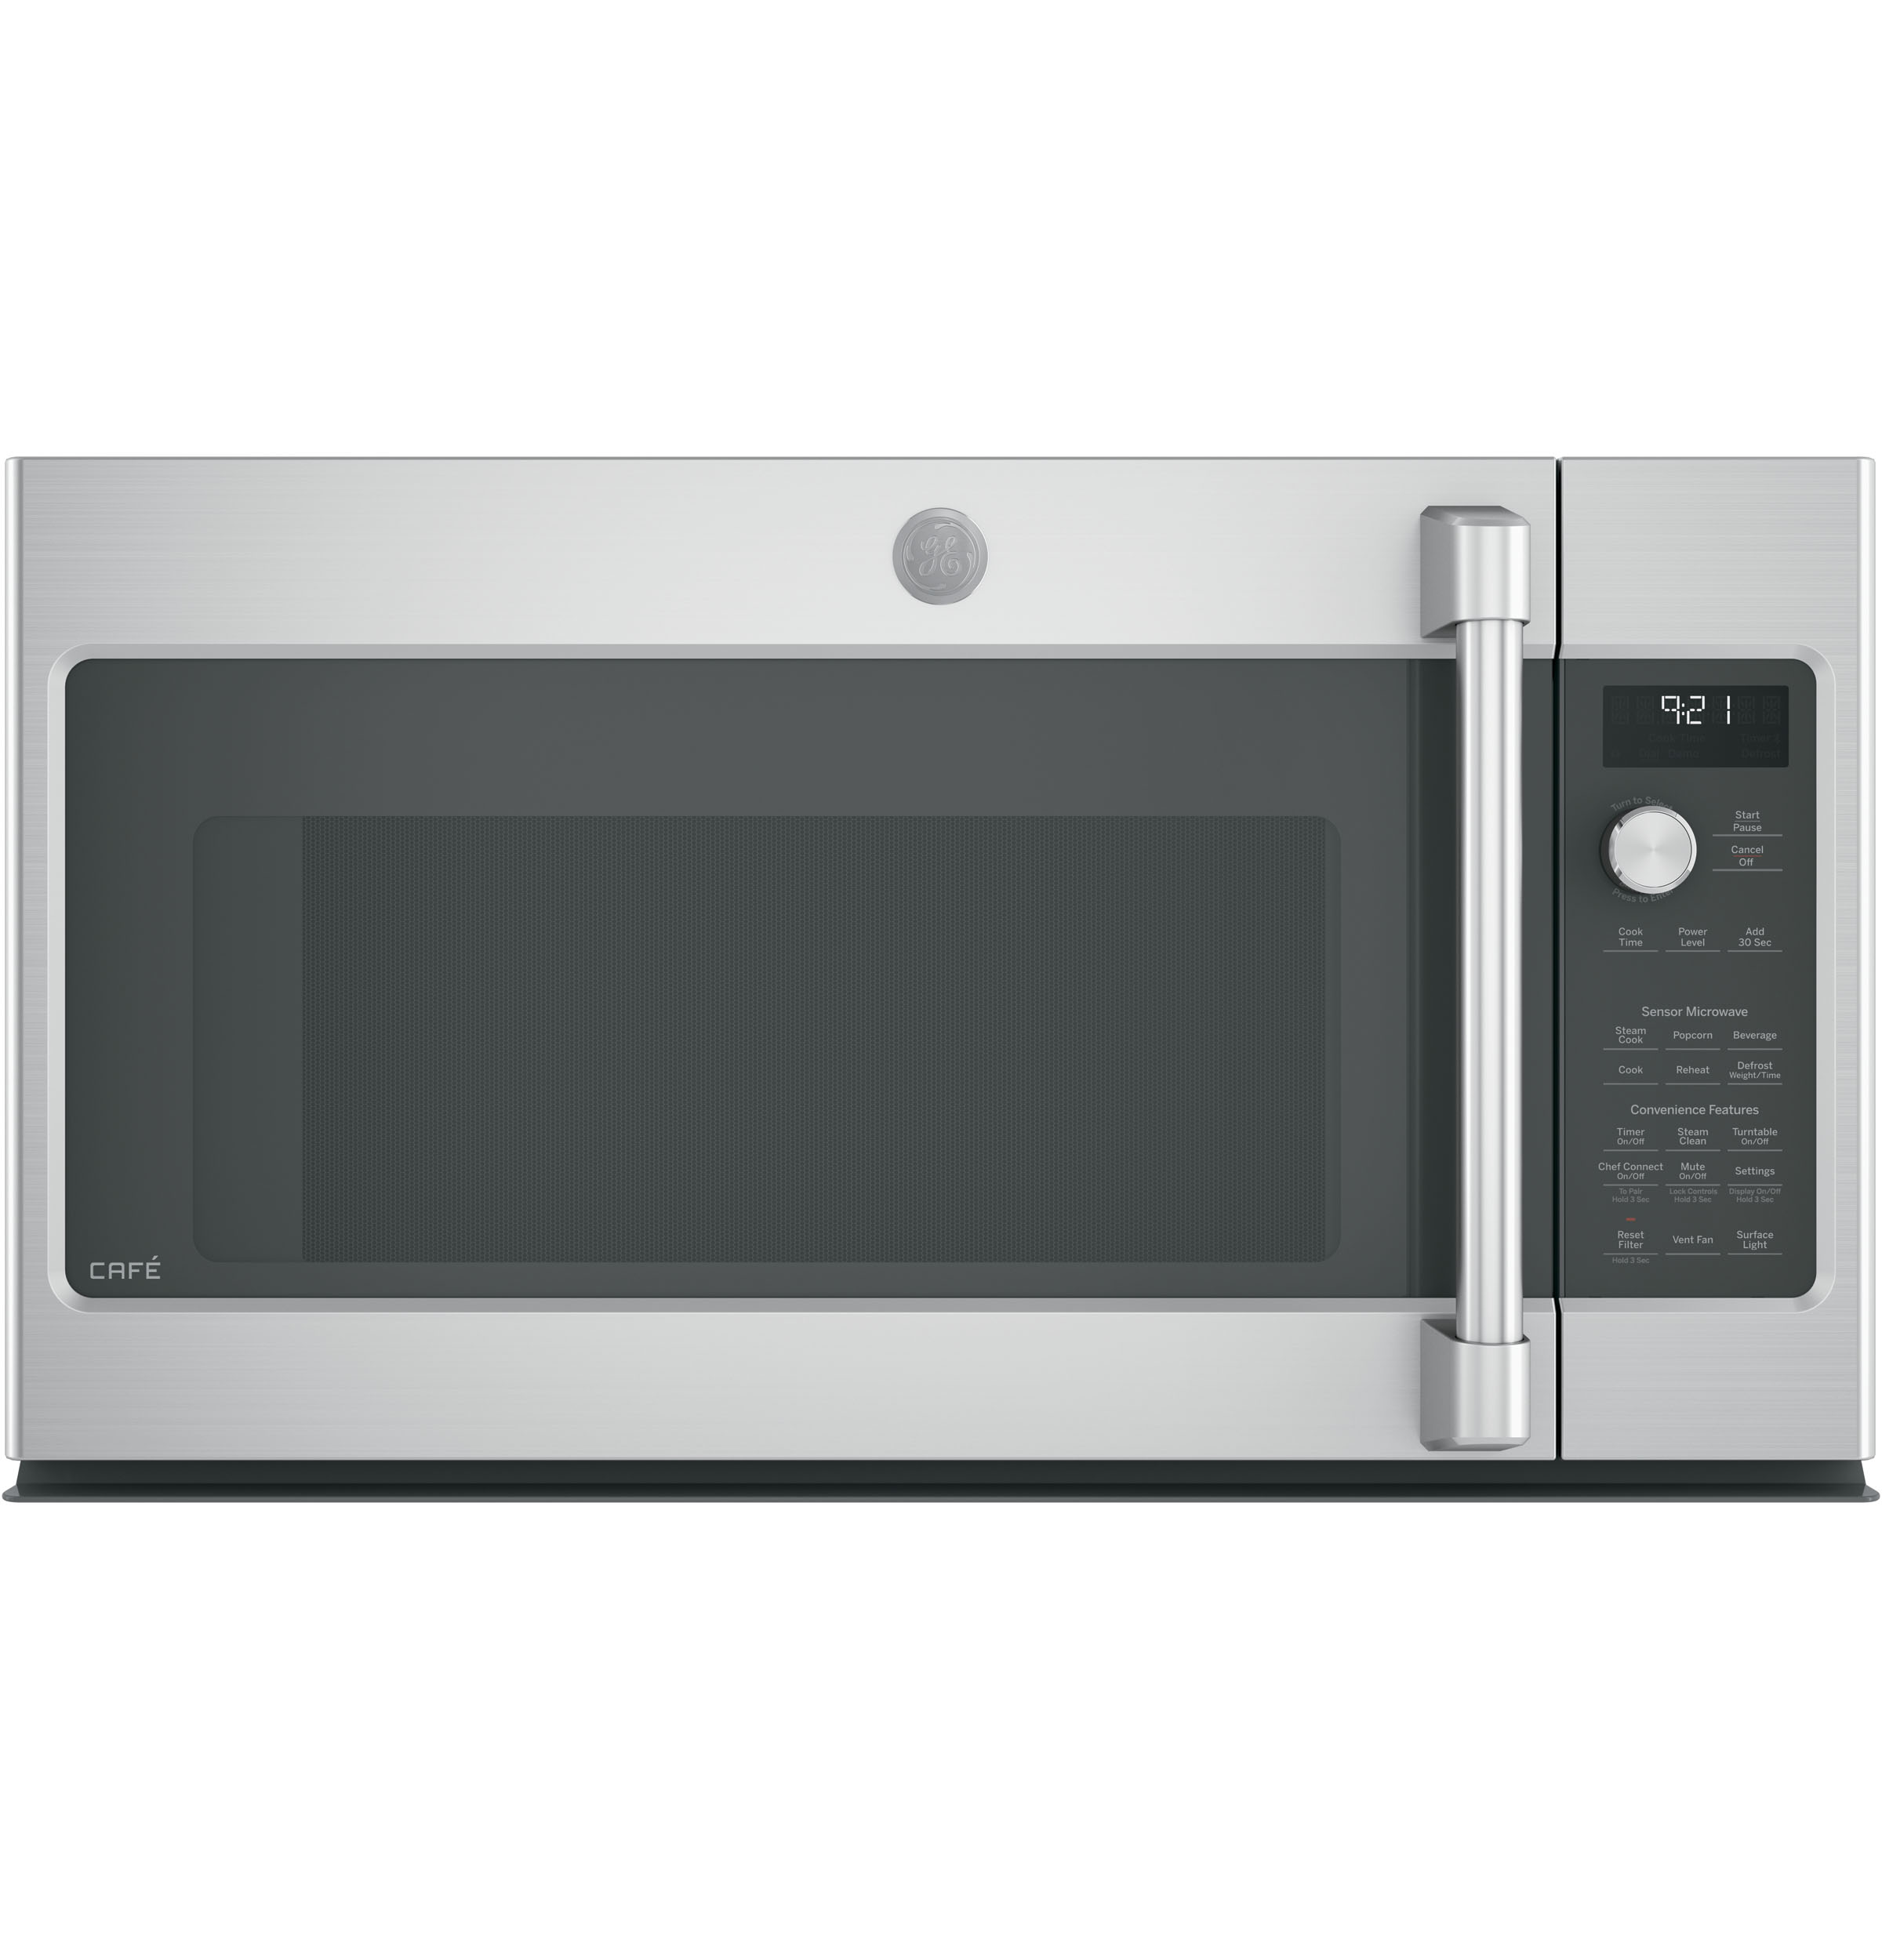 GE Café™ Series 2.1 Cu. Ft. Over-the-Range Microwave Oven